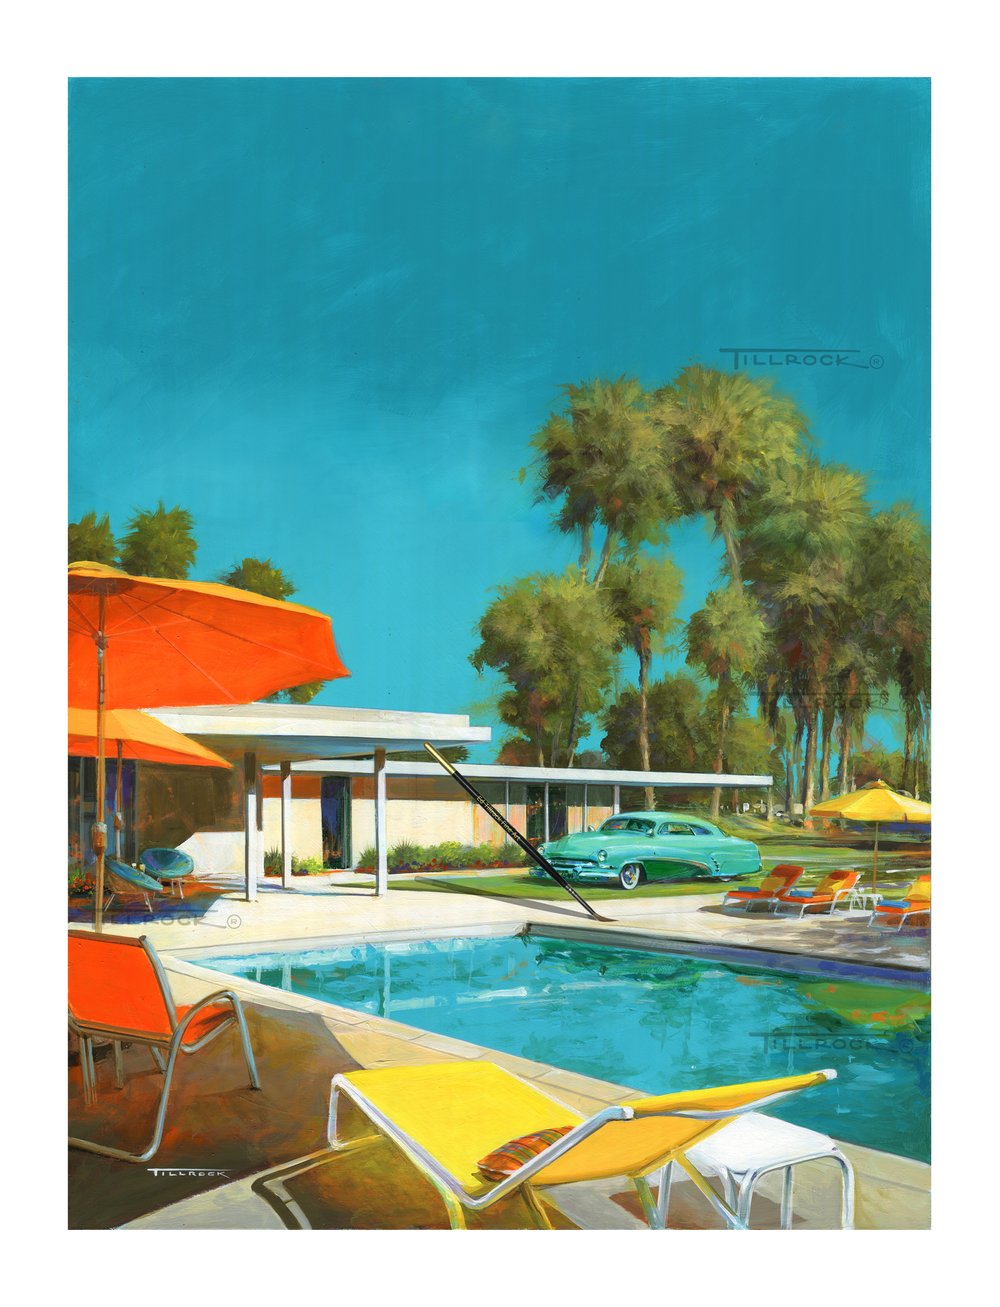 Image of "The Hirohata Merc in Palm Springs" (13x19") Print